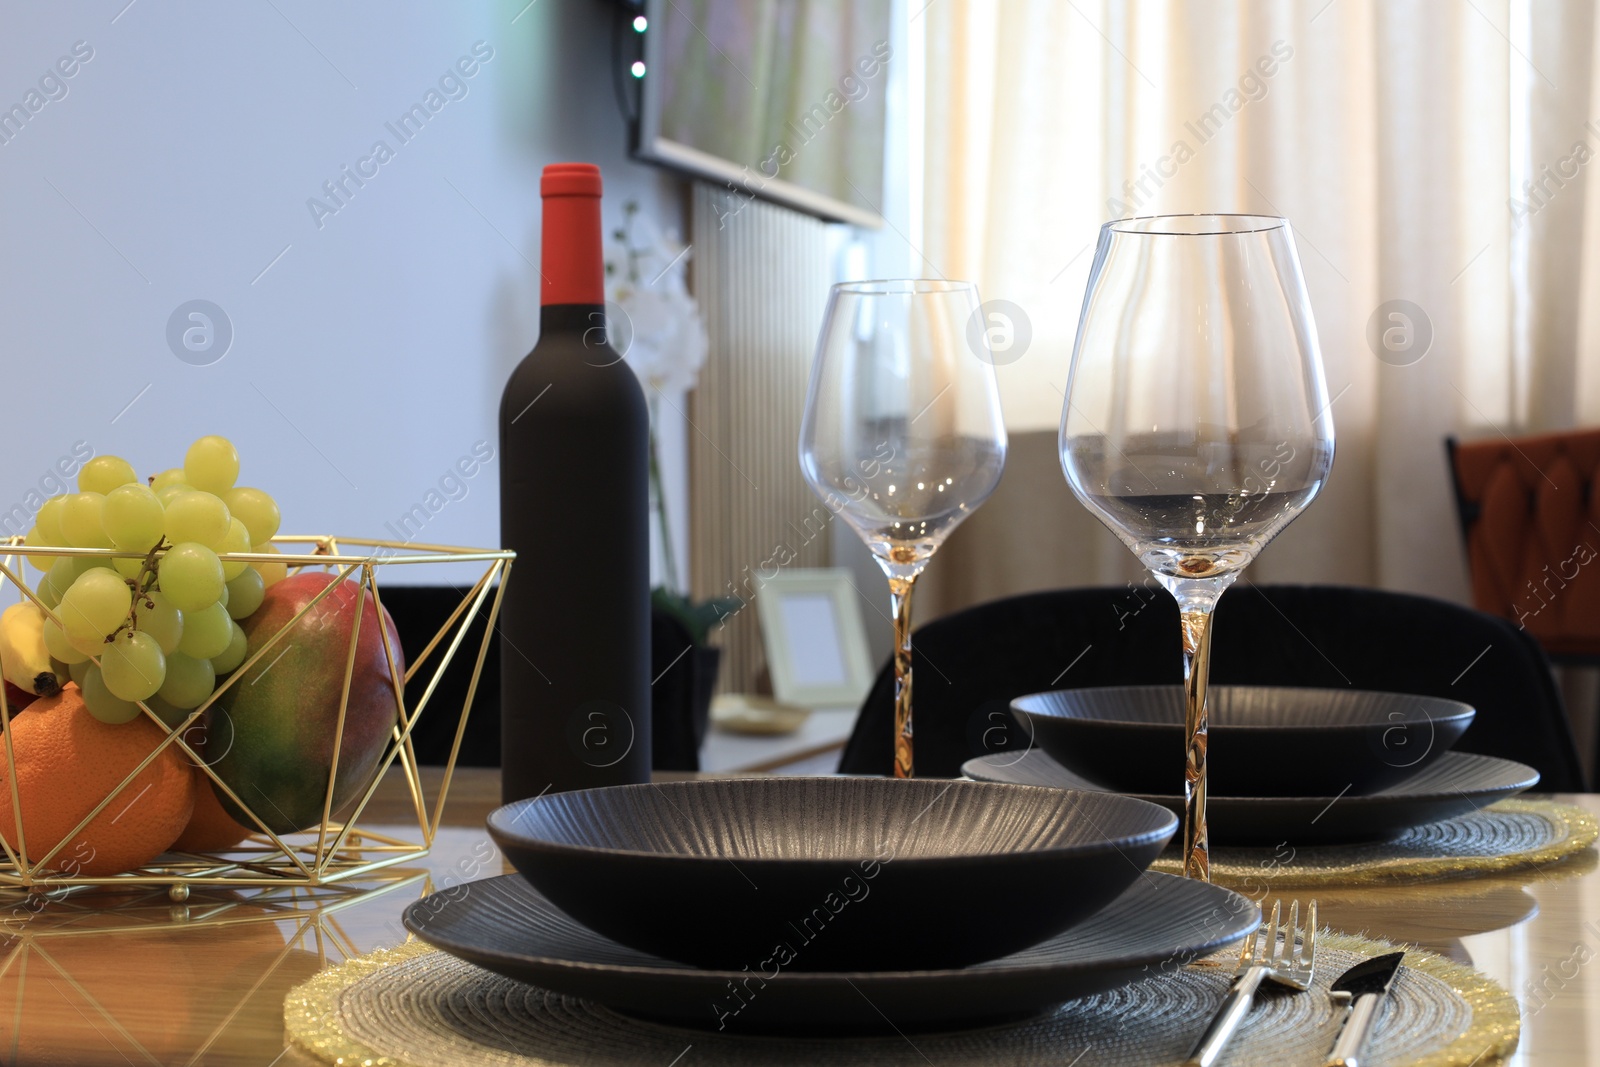 Photo of Bottle of wine and fruits on table served for dinner indoors